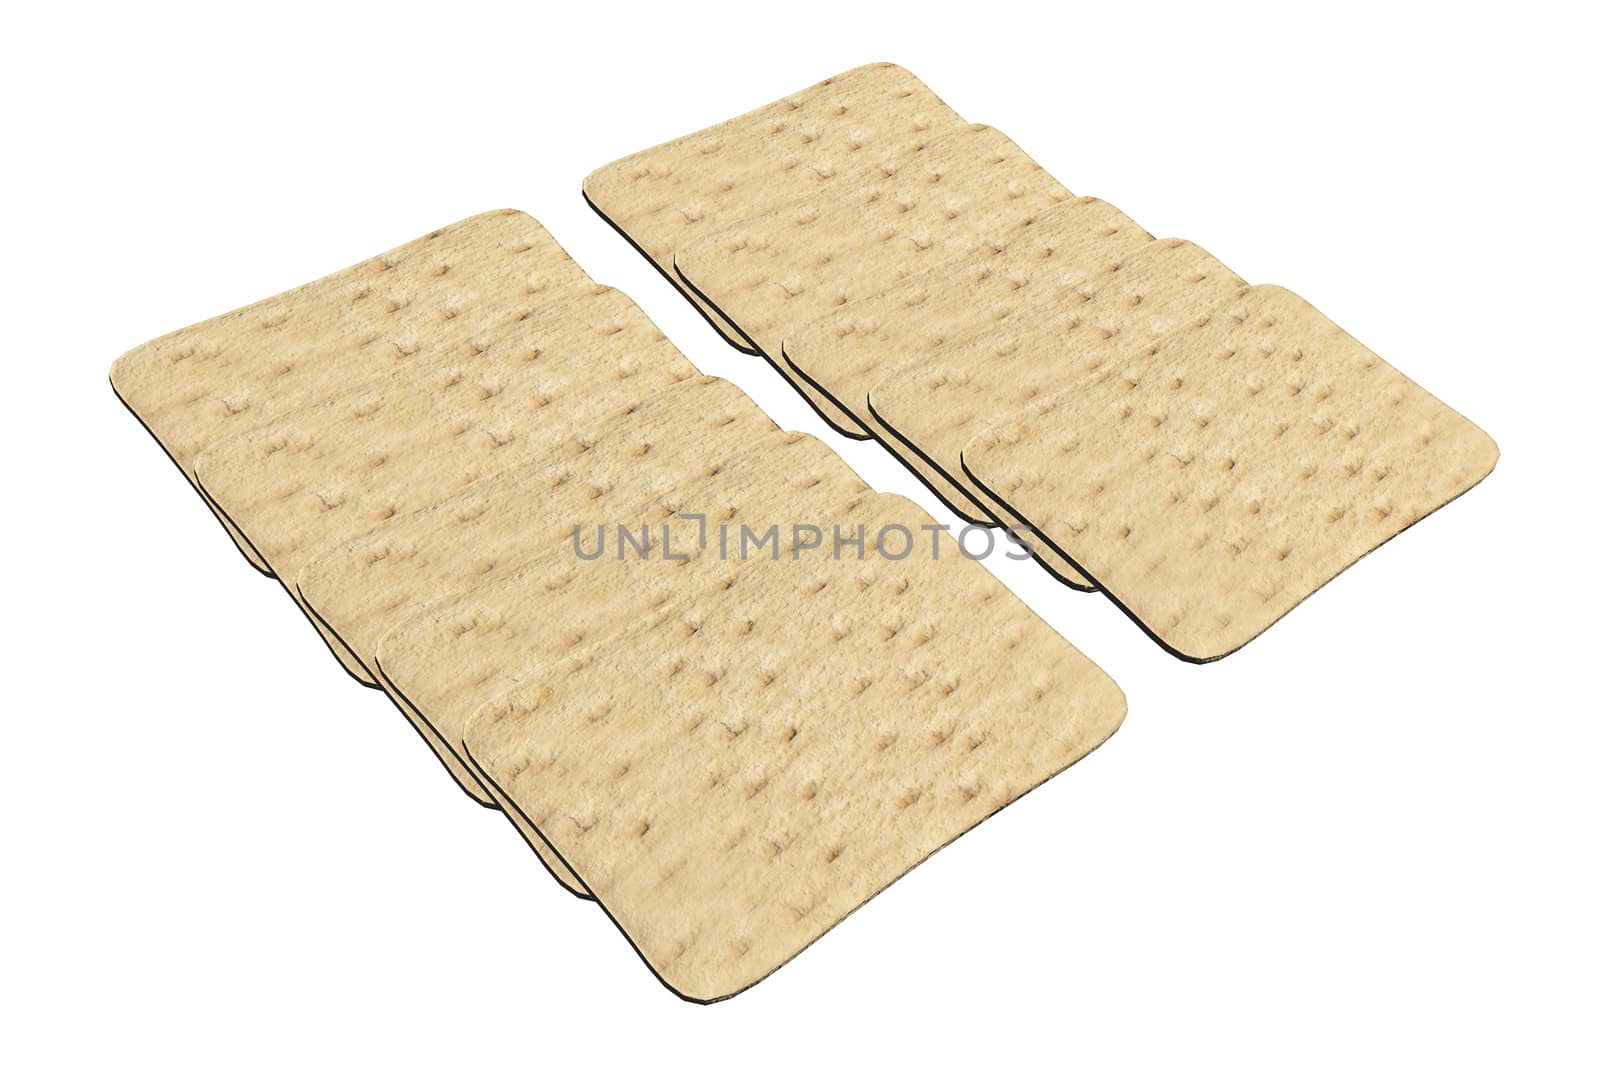 Set of rectangular wheat crackers, 3d illustration, isolated against a white background